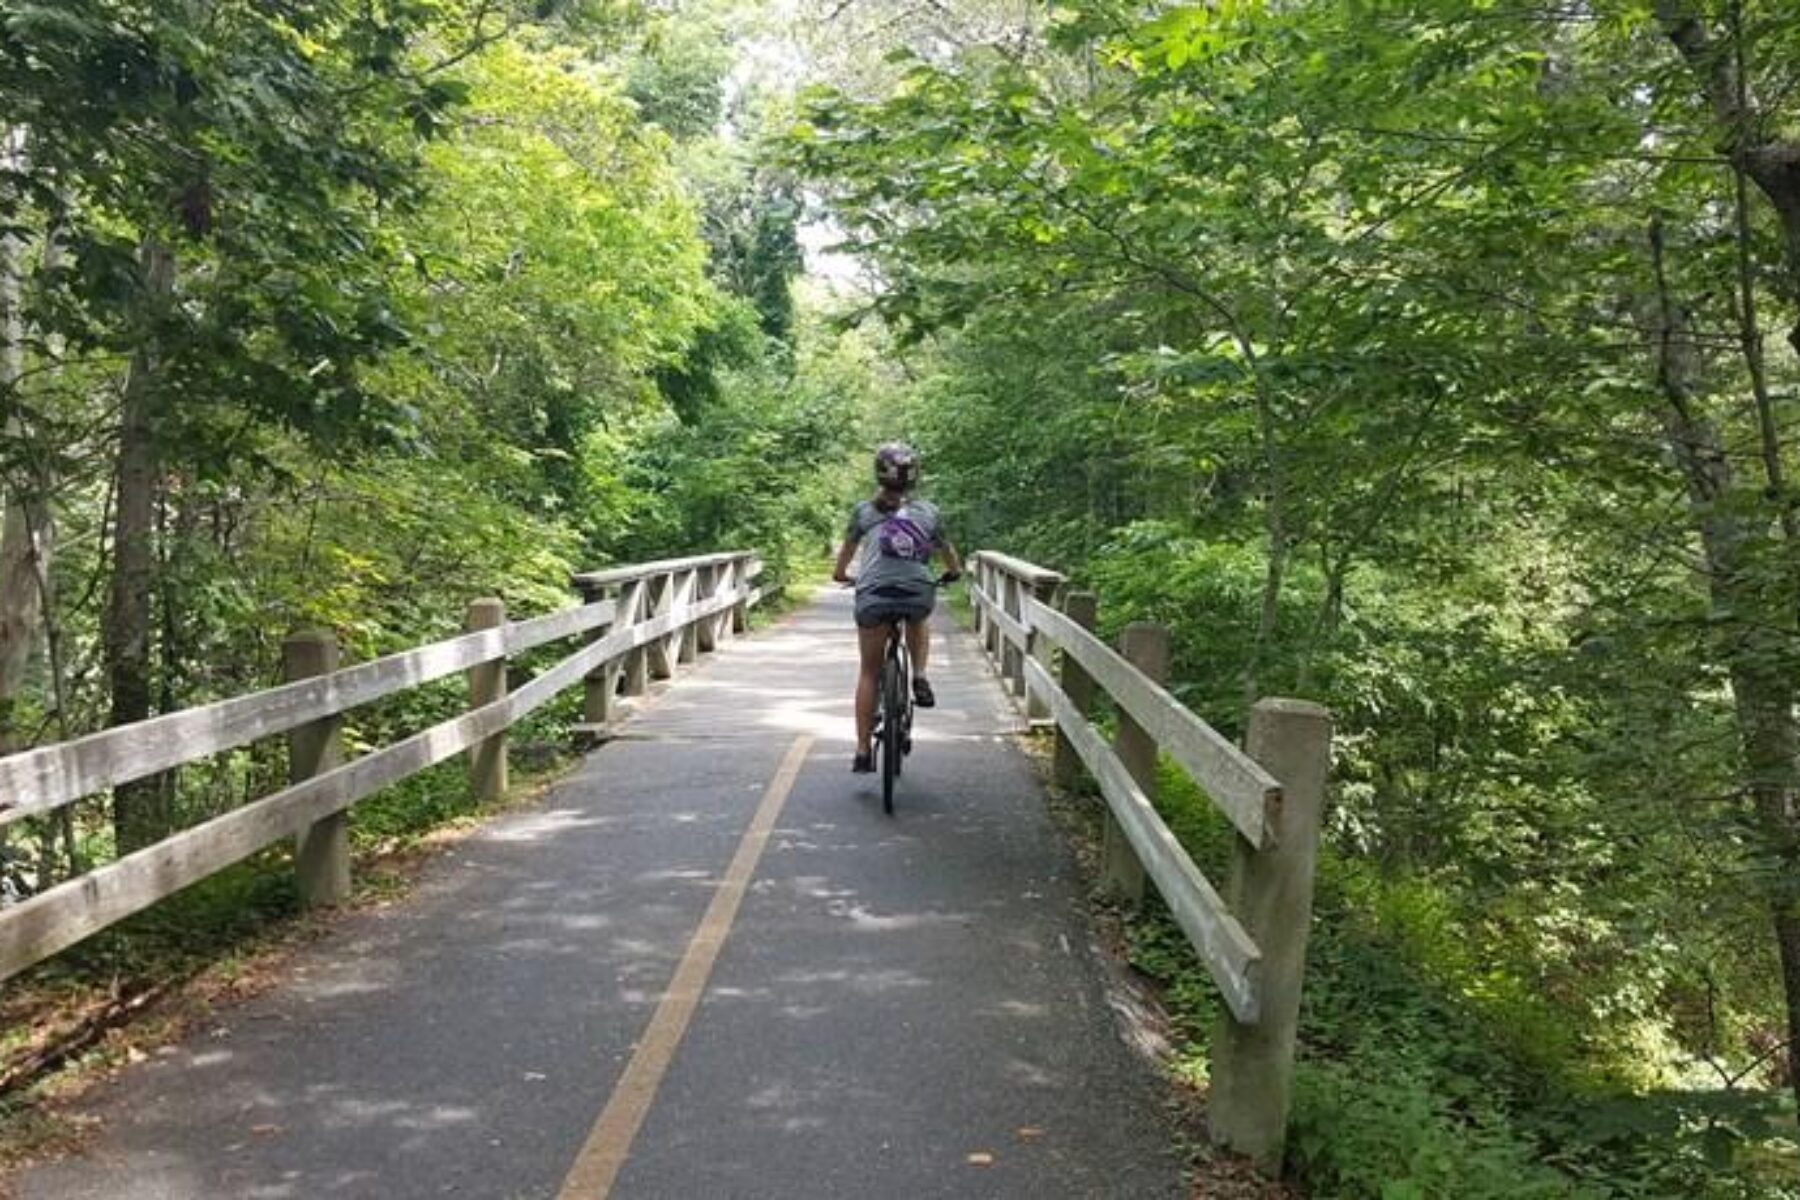 The 10.7-mile Shining Sea Bikeway provides a tranquil experience in Cape Cod, one of New England's popular summer destinations. | Photo by Leeann Sinpatanasakul, courtesy Rails-to-Trails Conservancy